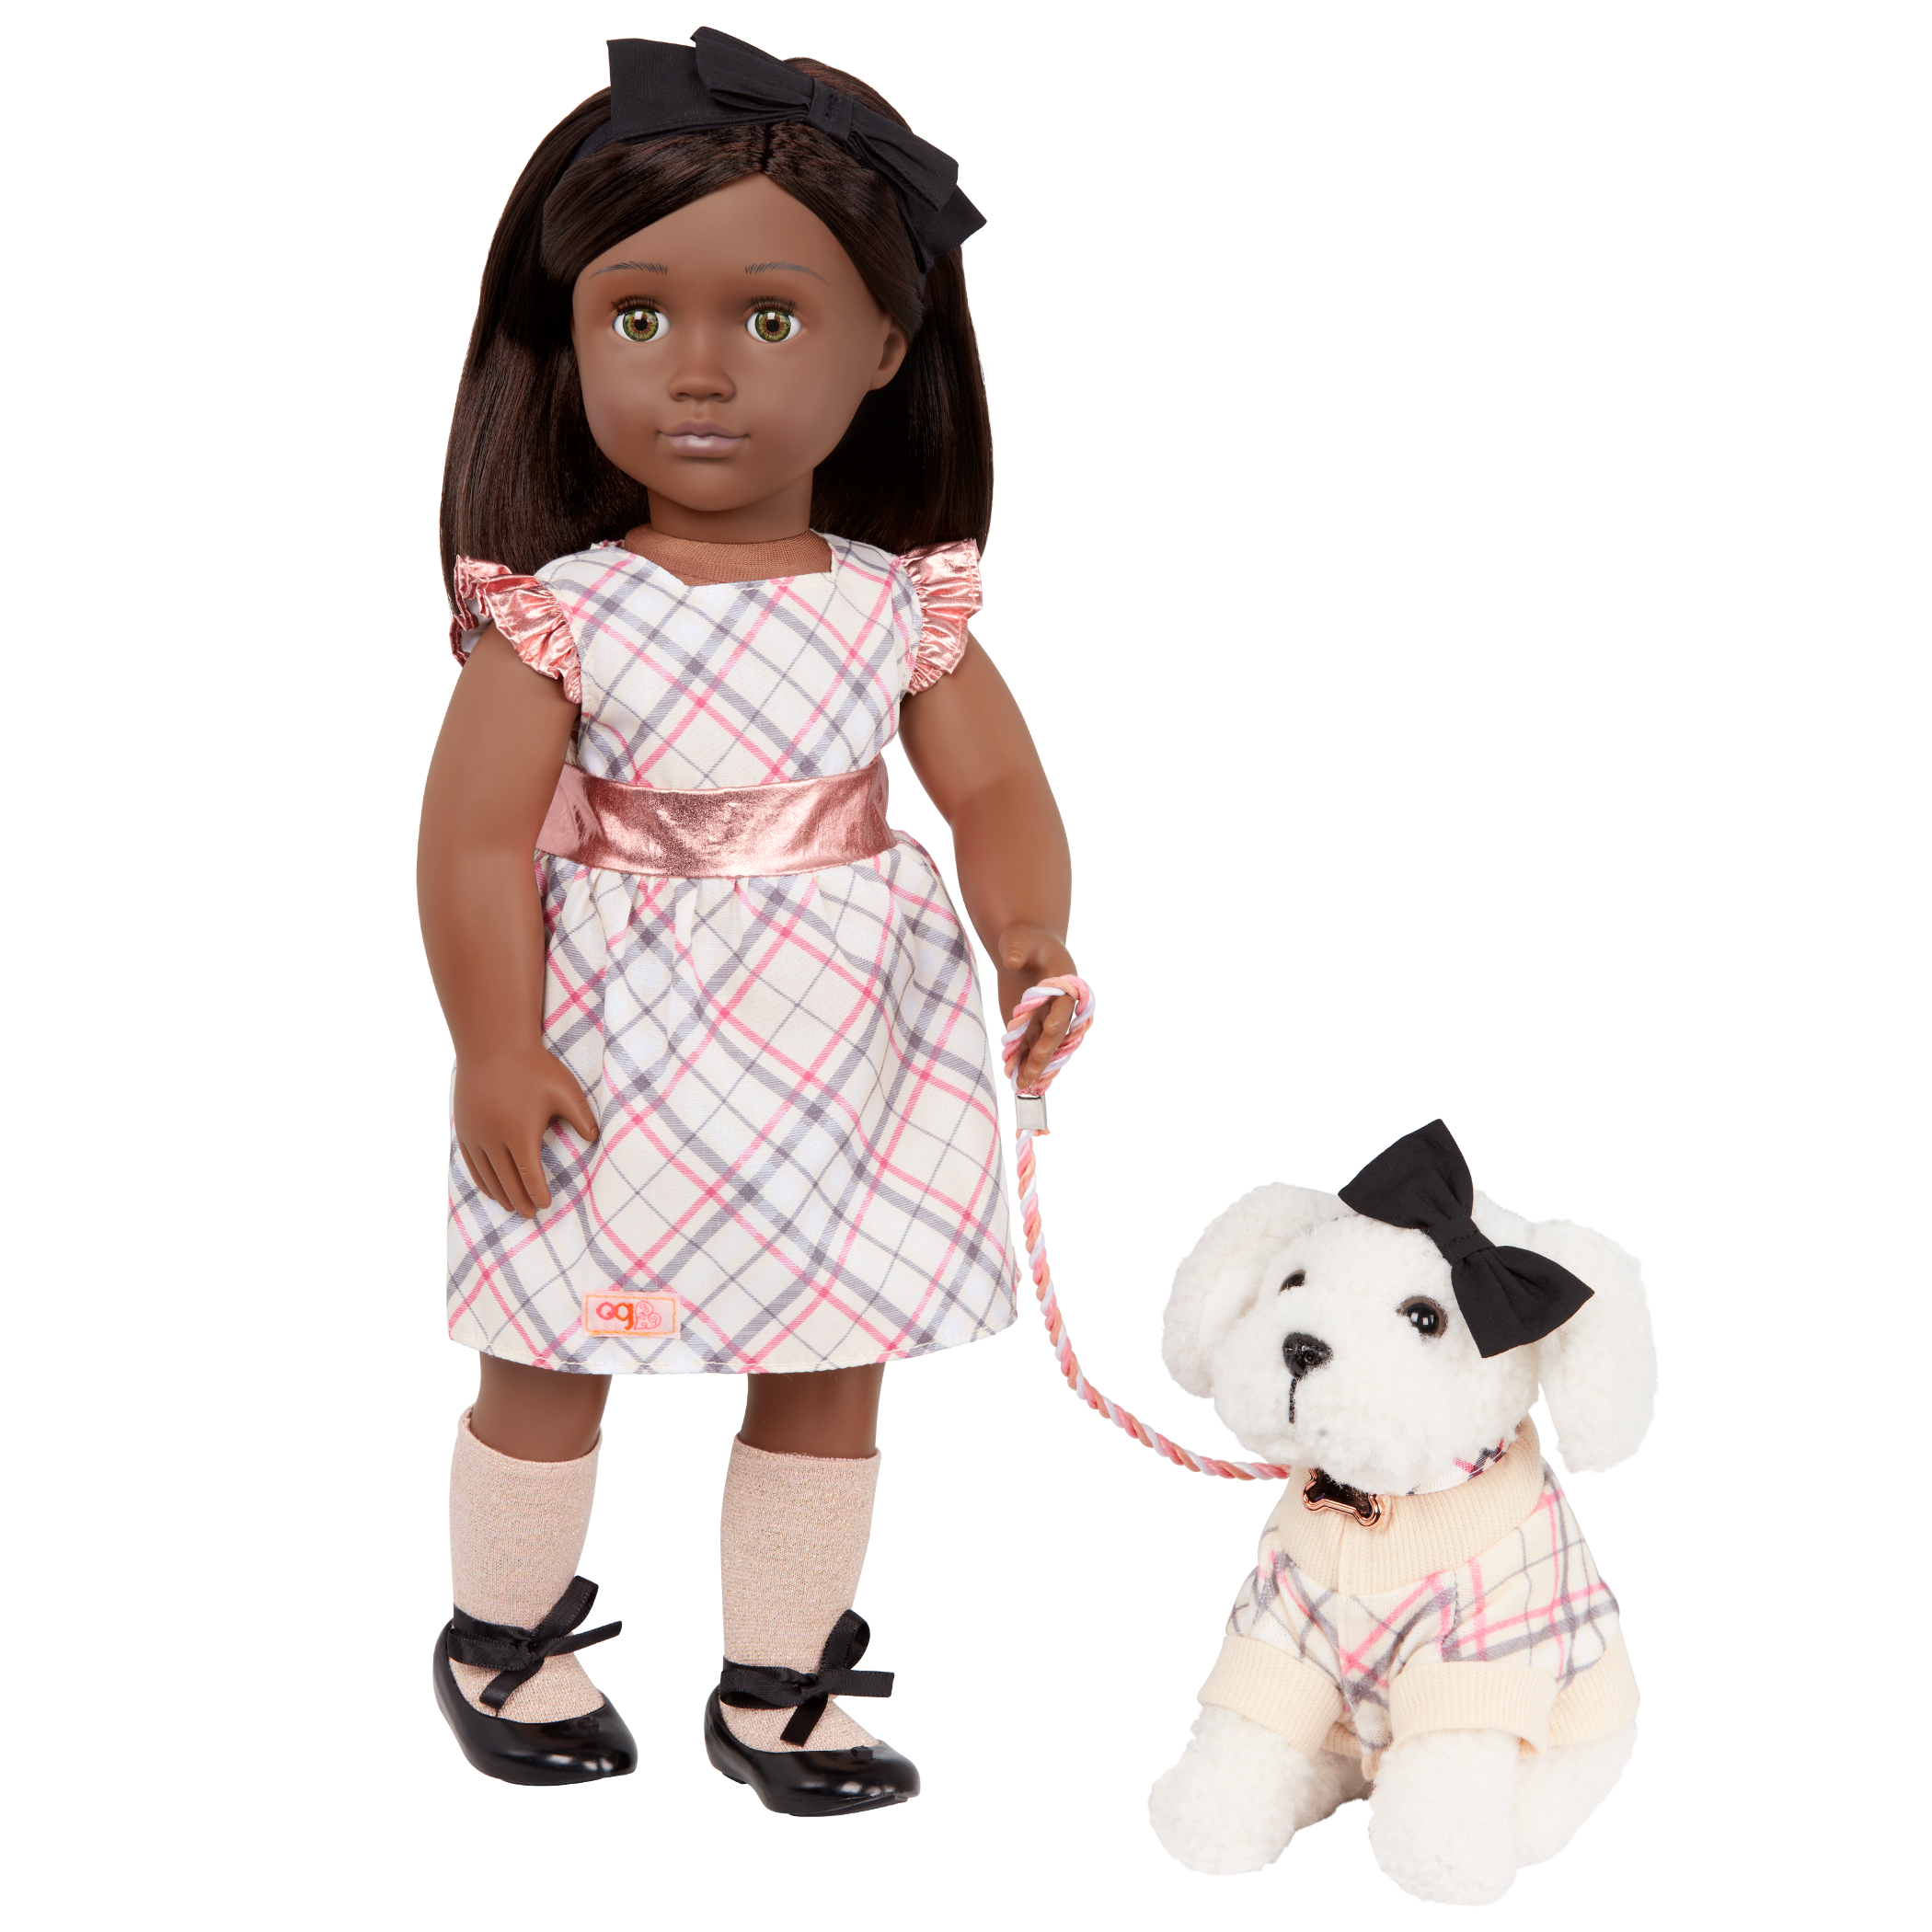 Our Generation 18-inch Doll Candice & Pet Dog Plush Chic